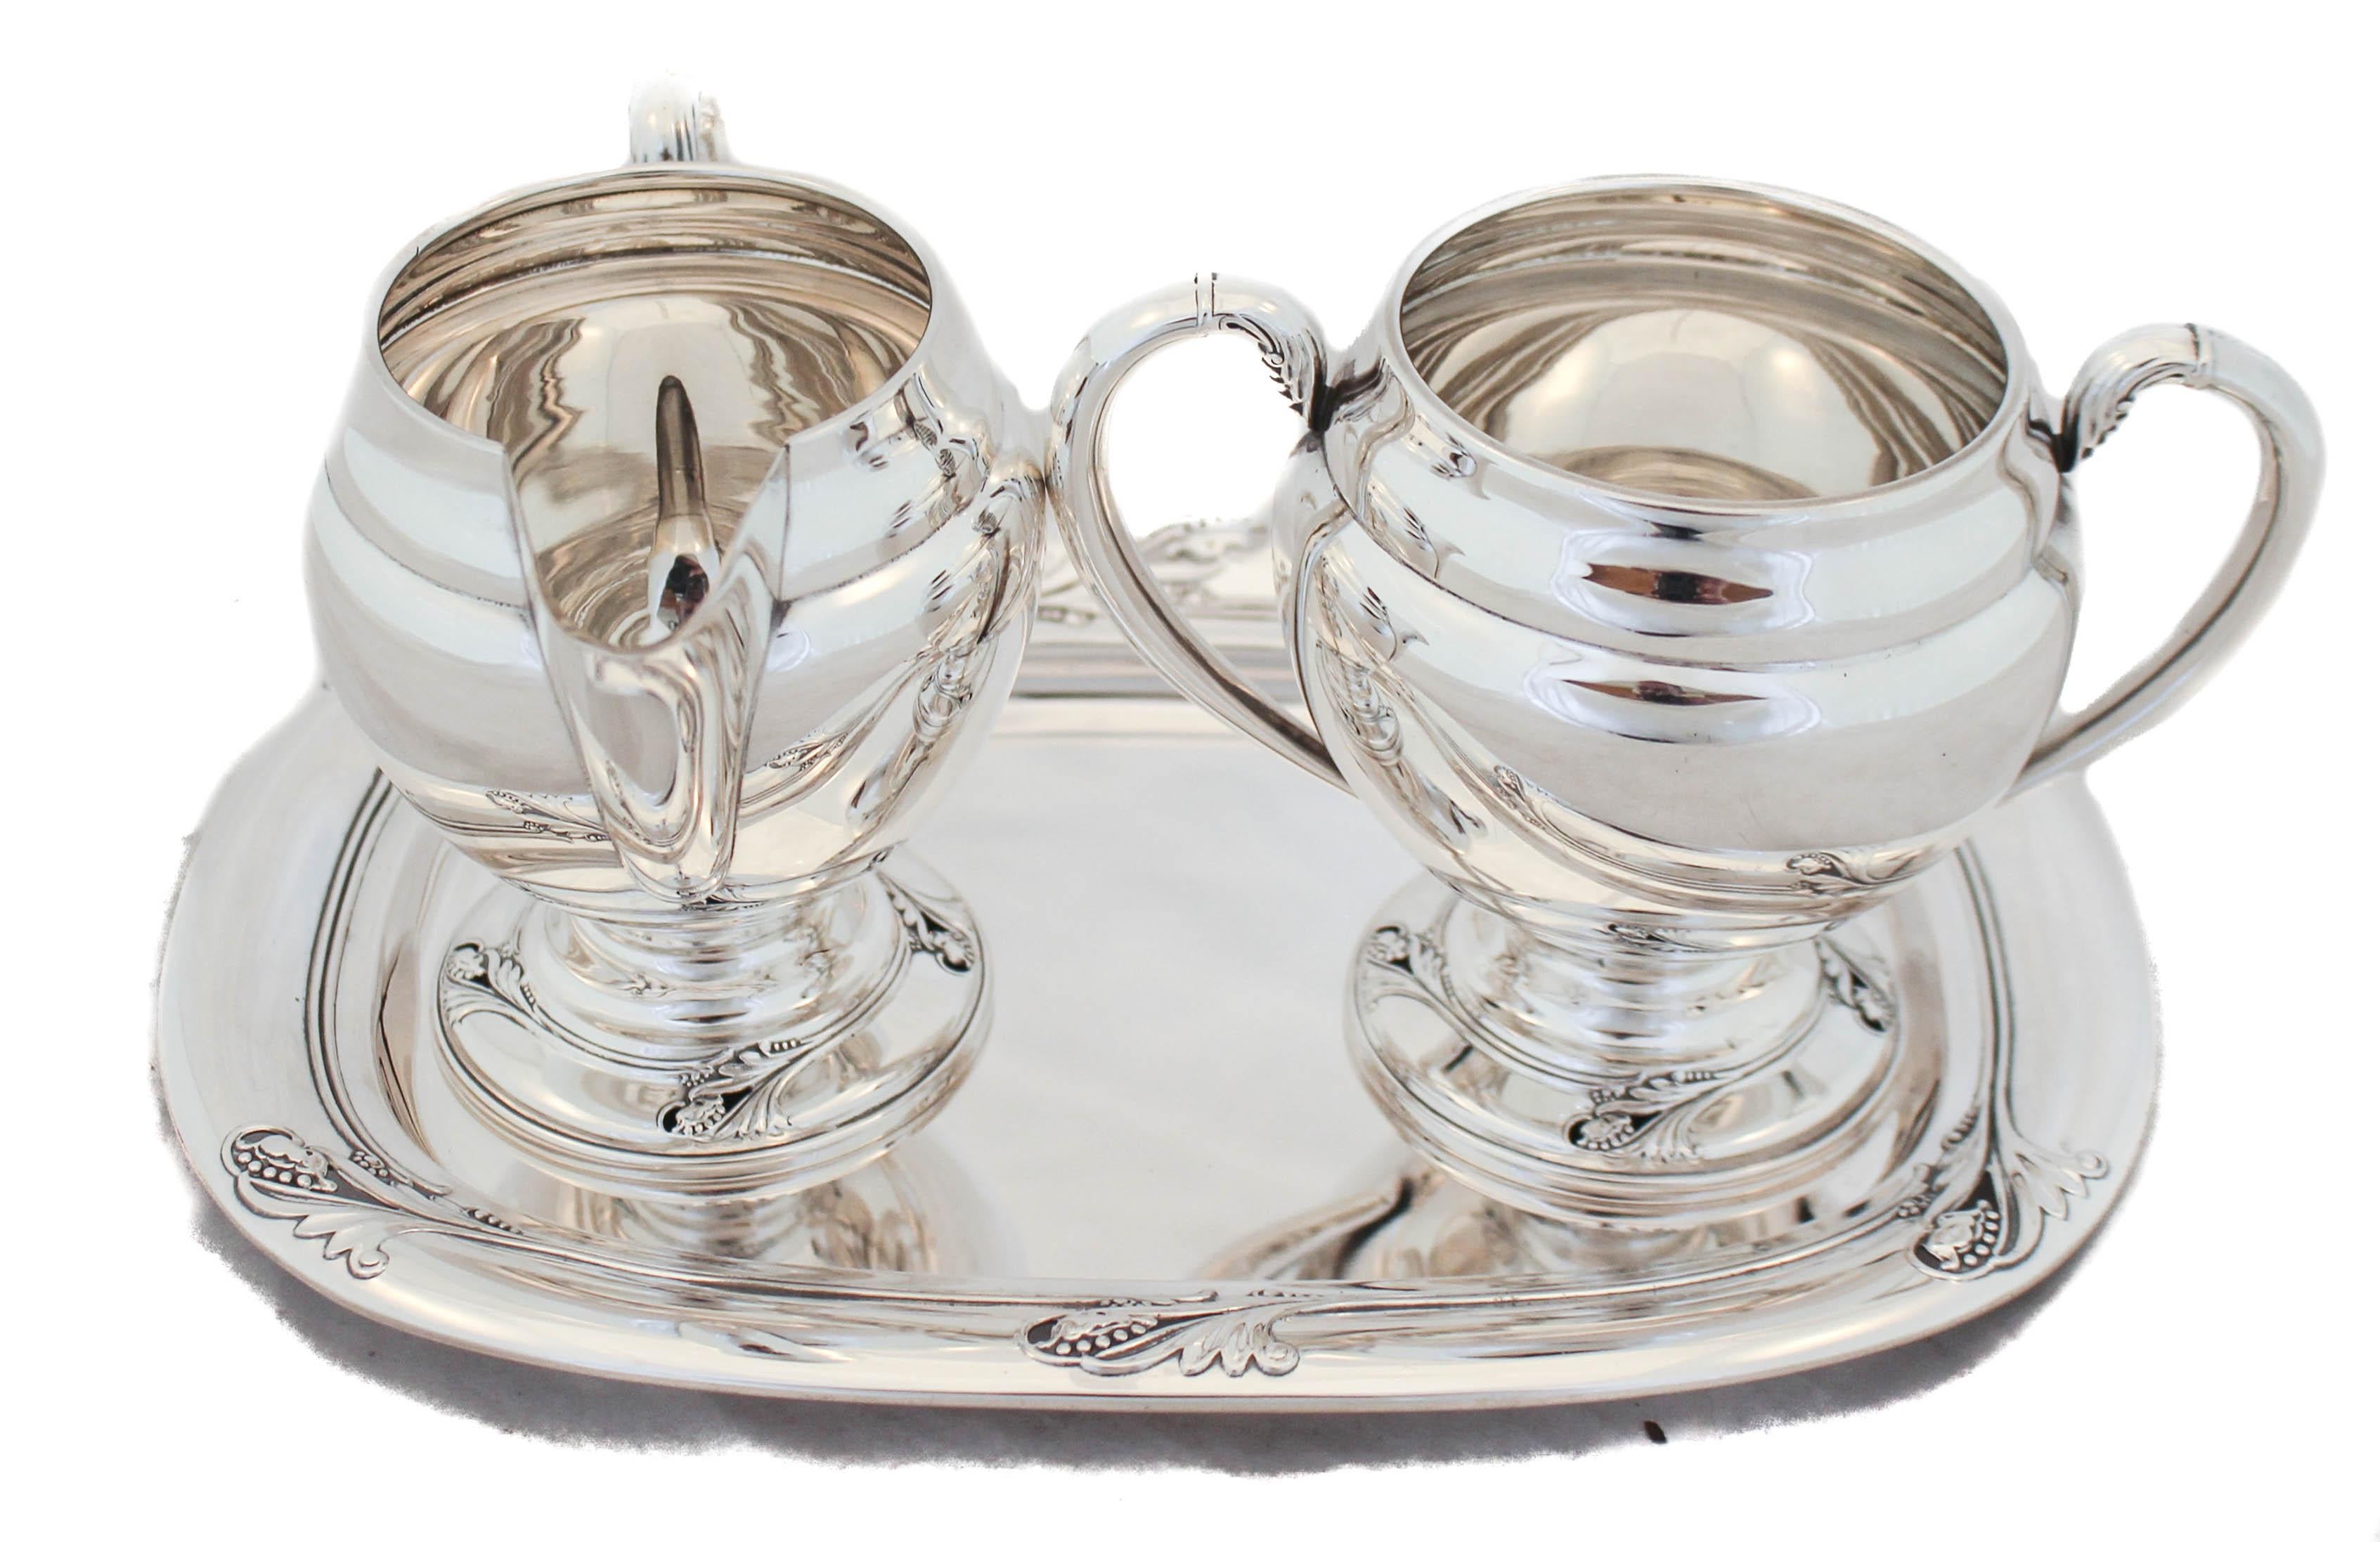 Being offered is a sterling silver creamer, sugar bowl and tray in the Spring Glory pattern by International Silver, 1942. This gorgeous Art Deco pattern has been a favorite ever since it was introduced in 1942. Each of the three pieces is signed